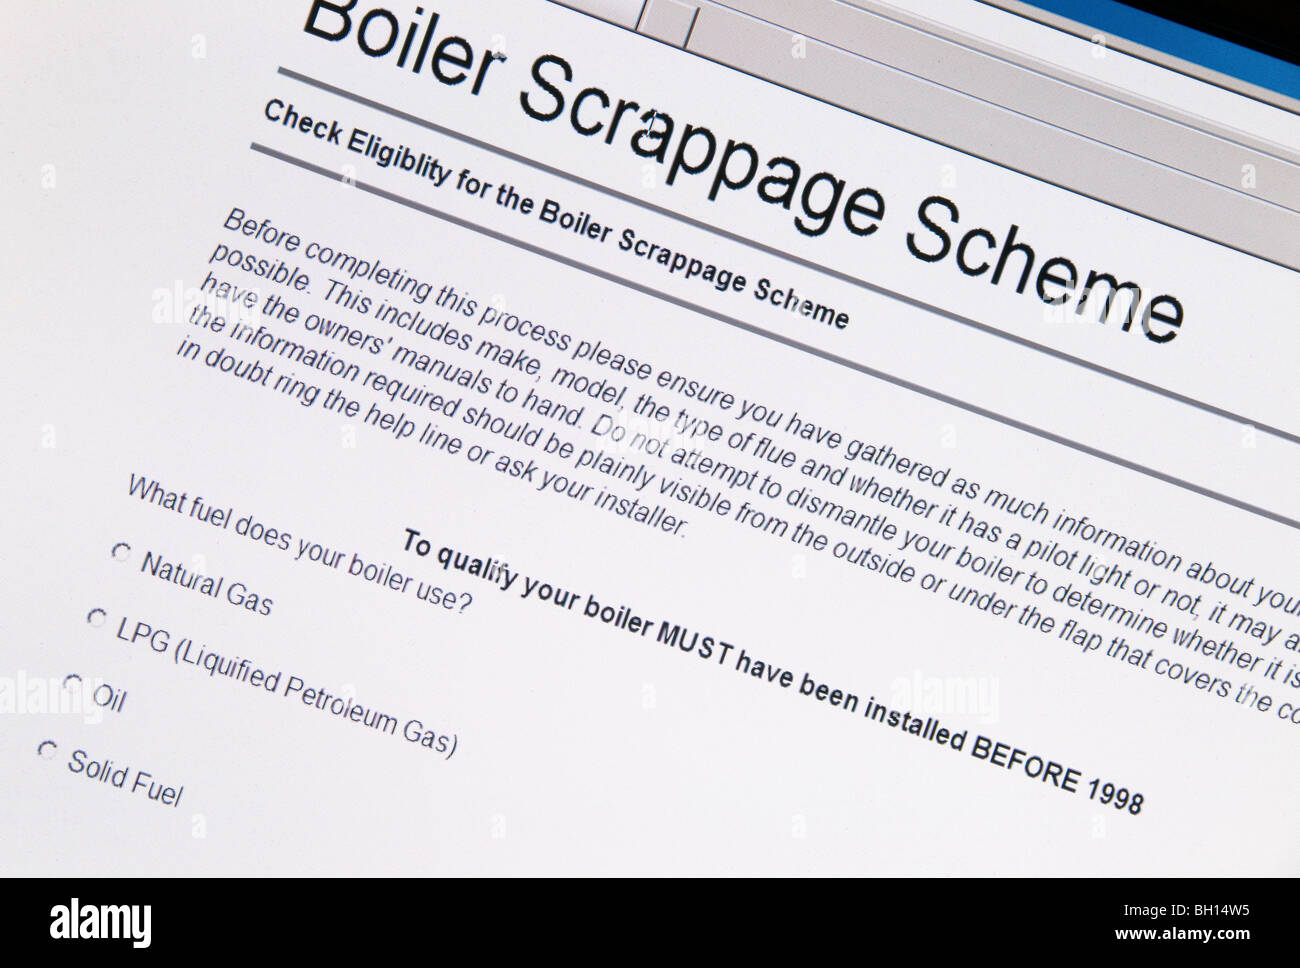 Boiler Scrappage Scheme - online form to check eligibility Stock Photo